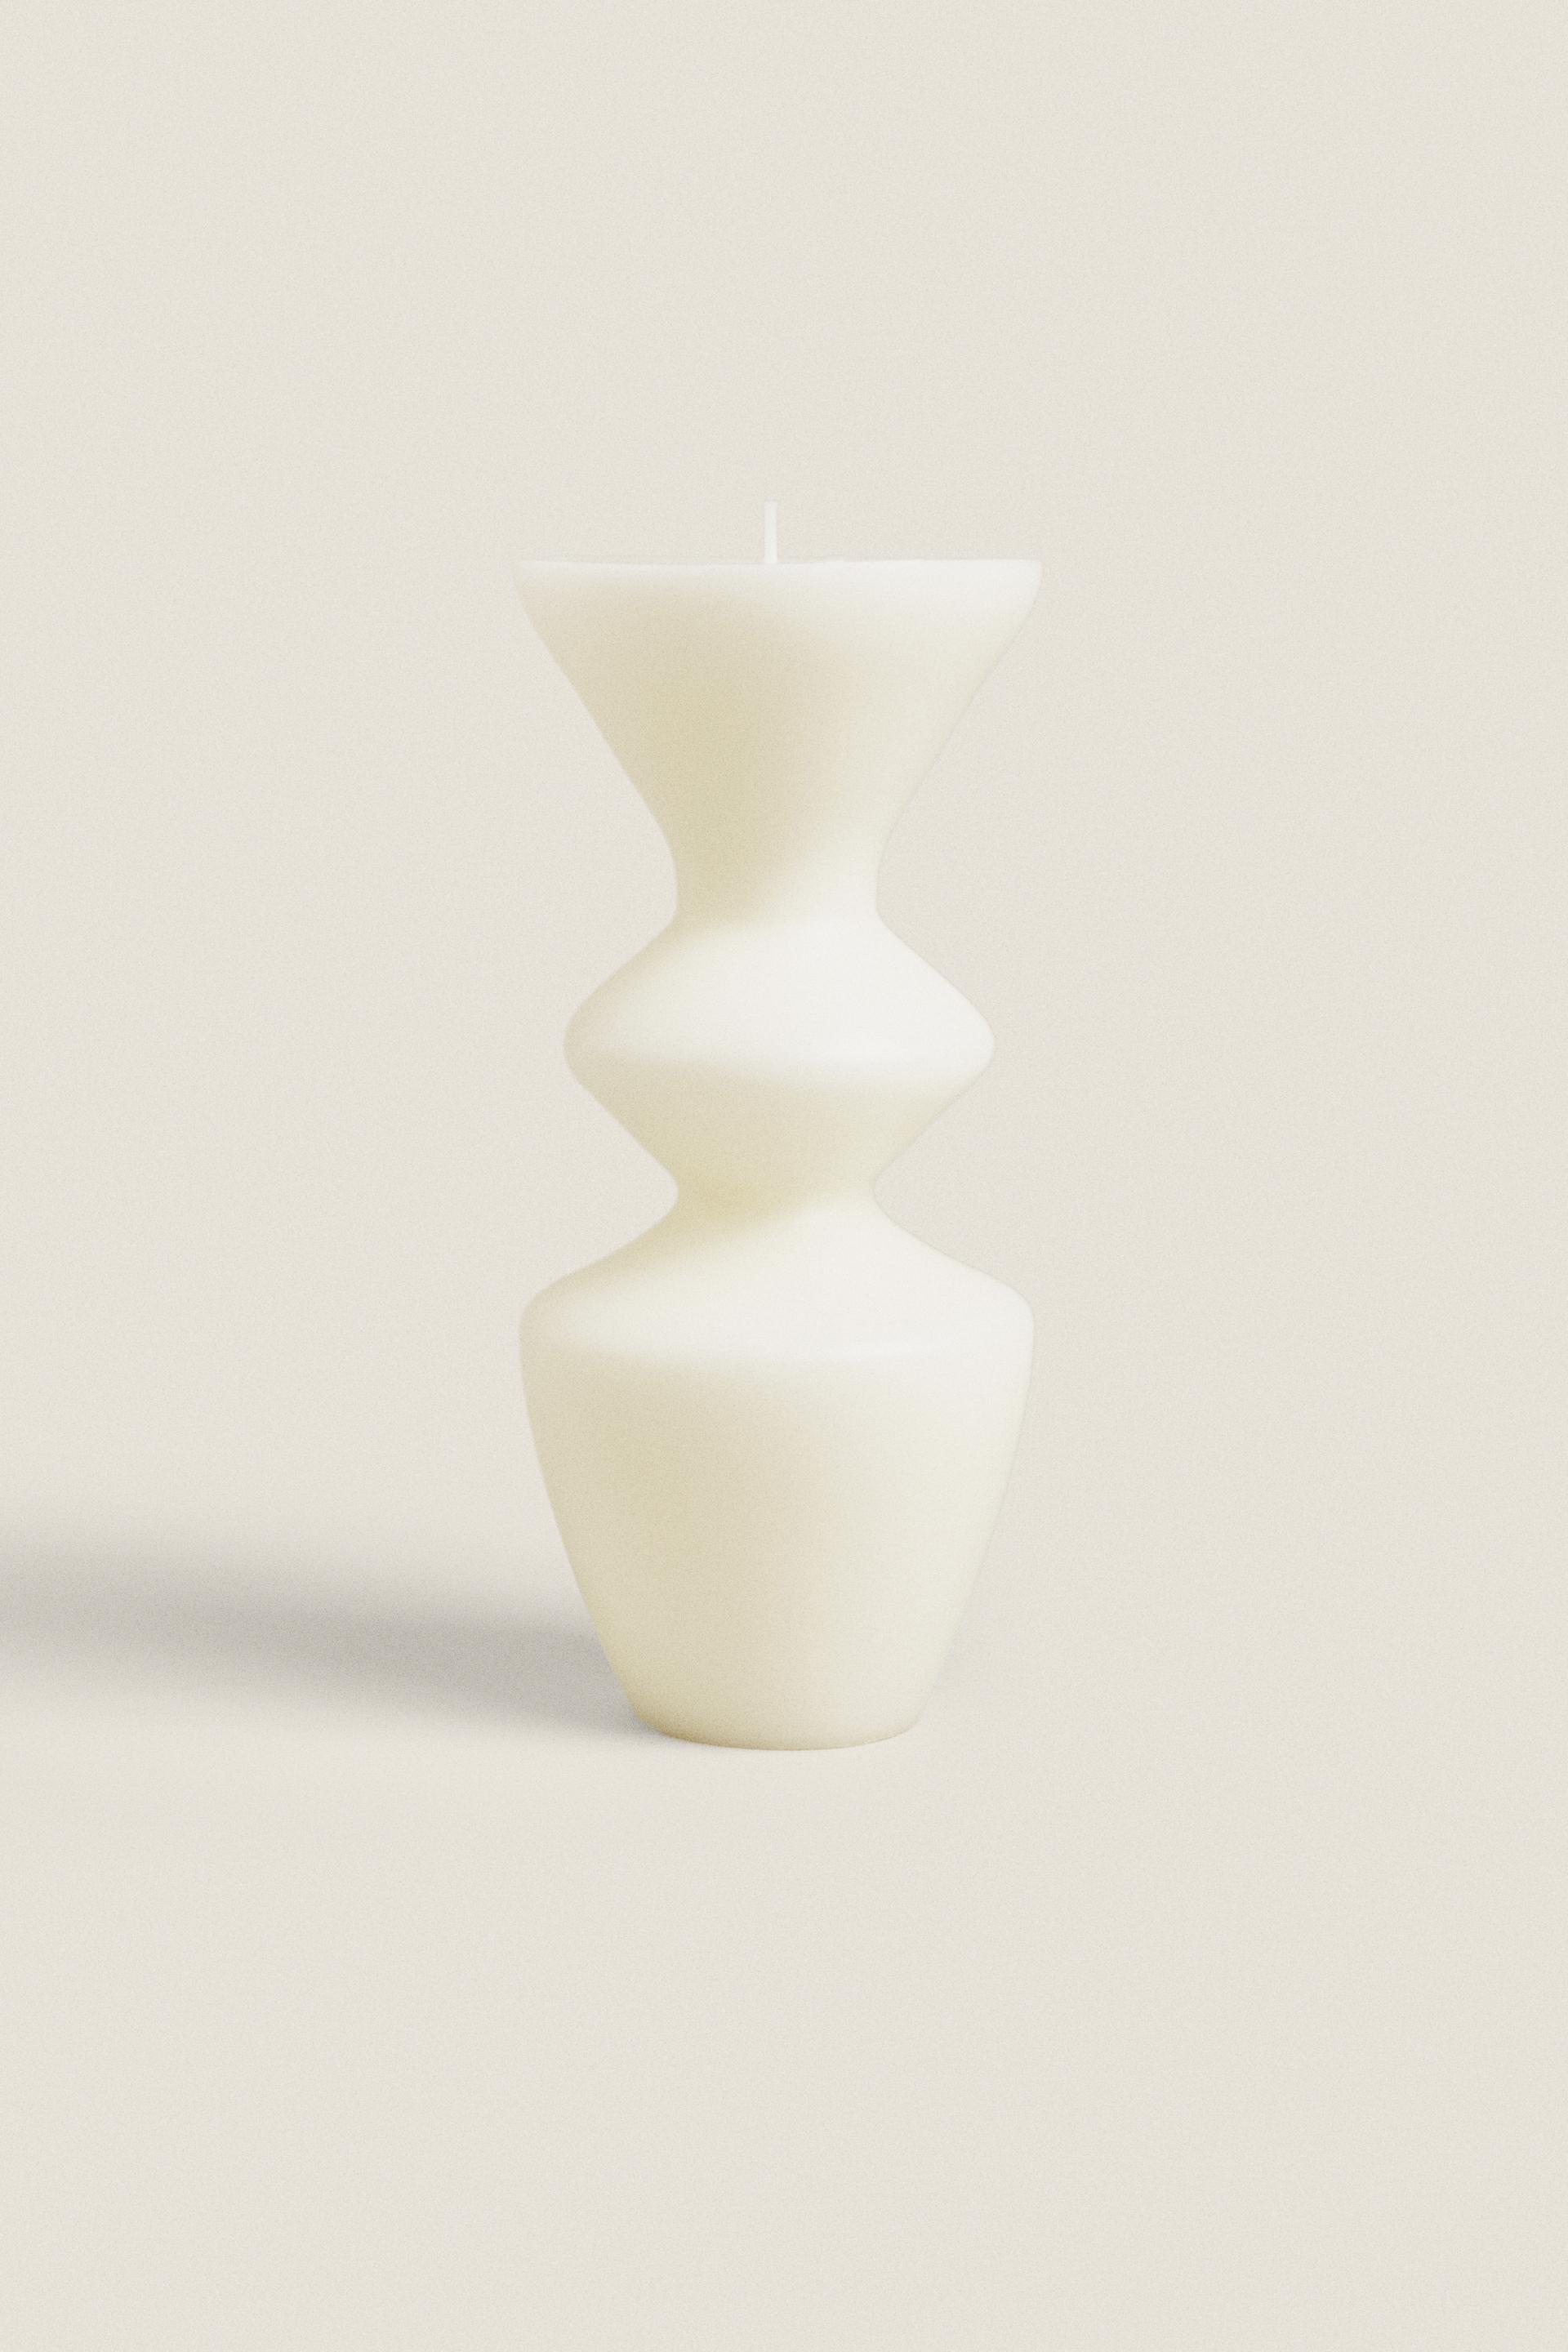 (610 G) WHITE PETALS SCENTED CANDLE CANDLESTICK ZARA